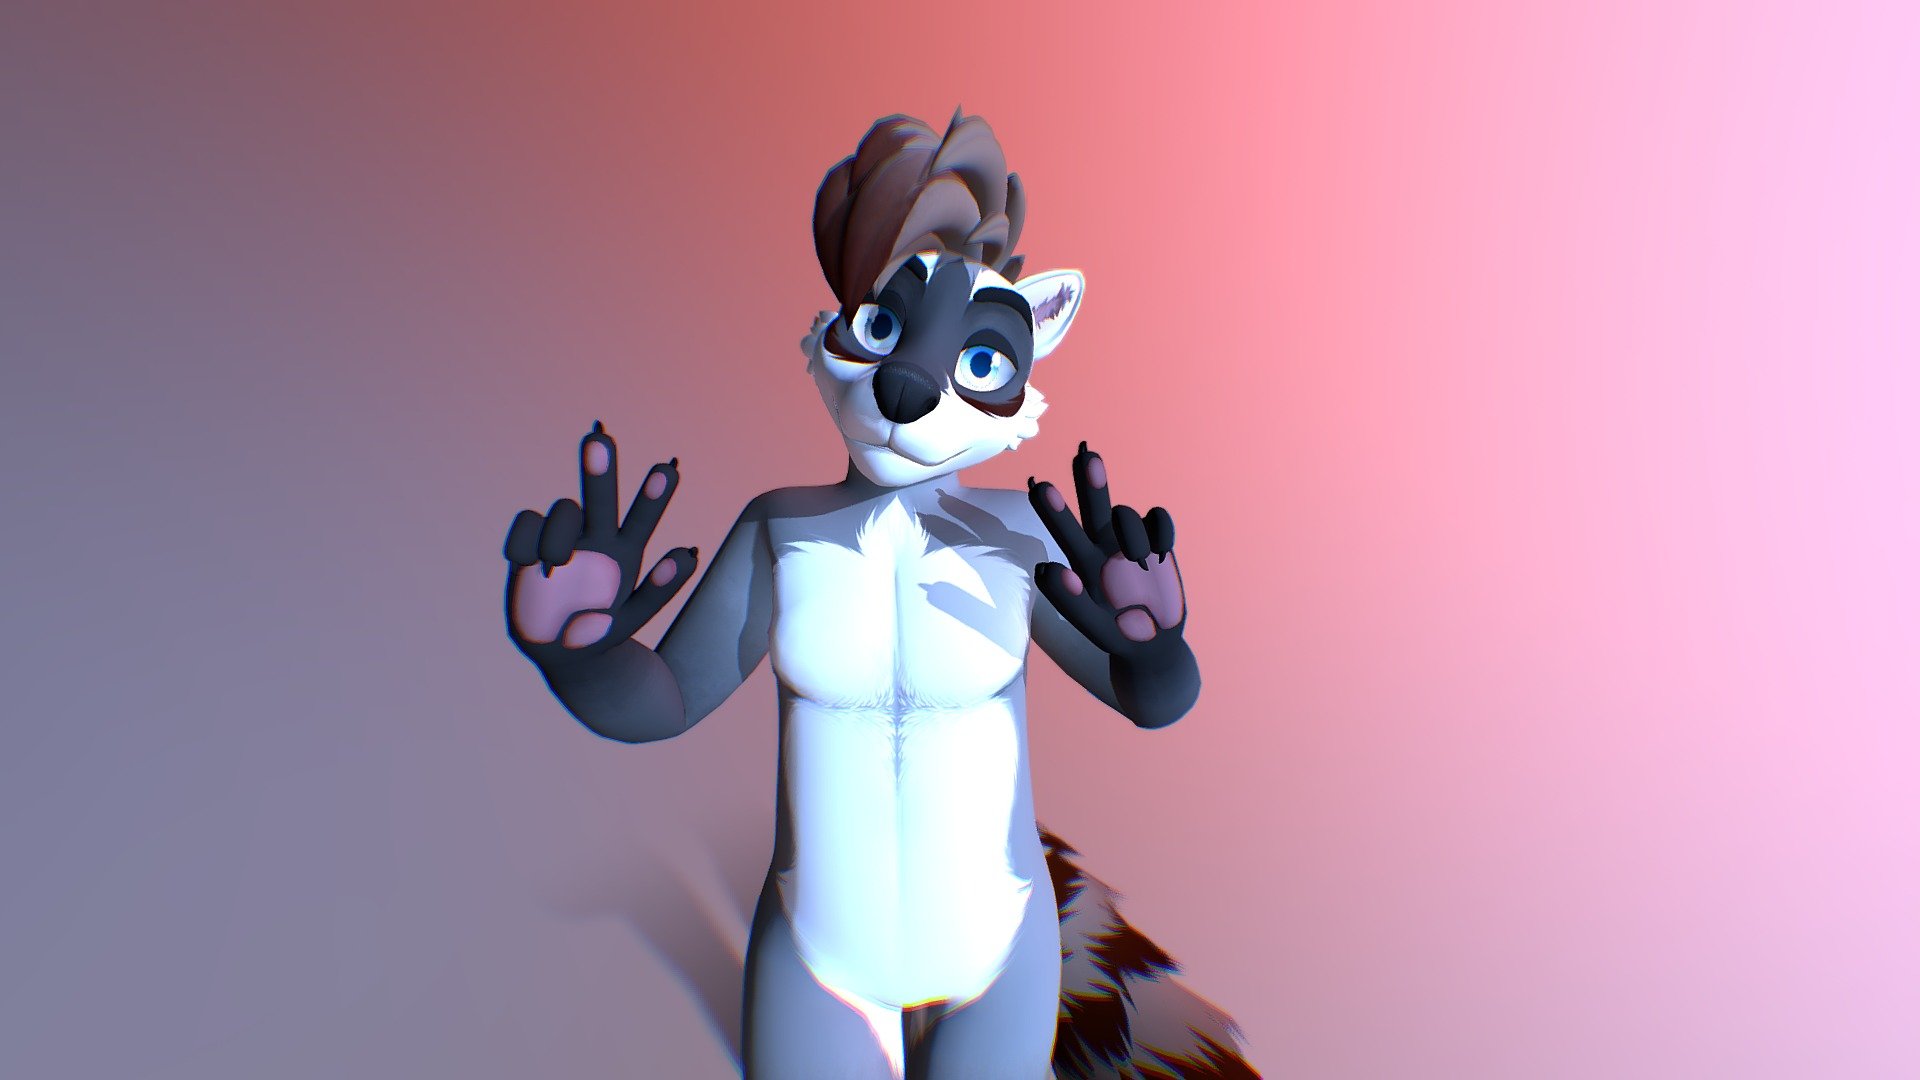 Male Raccoon Vrchat Avatar 3d Model By Meelo Meelo A05d66a Sketchfab